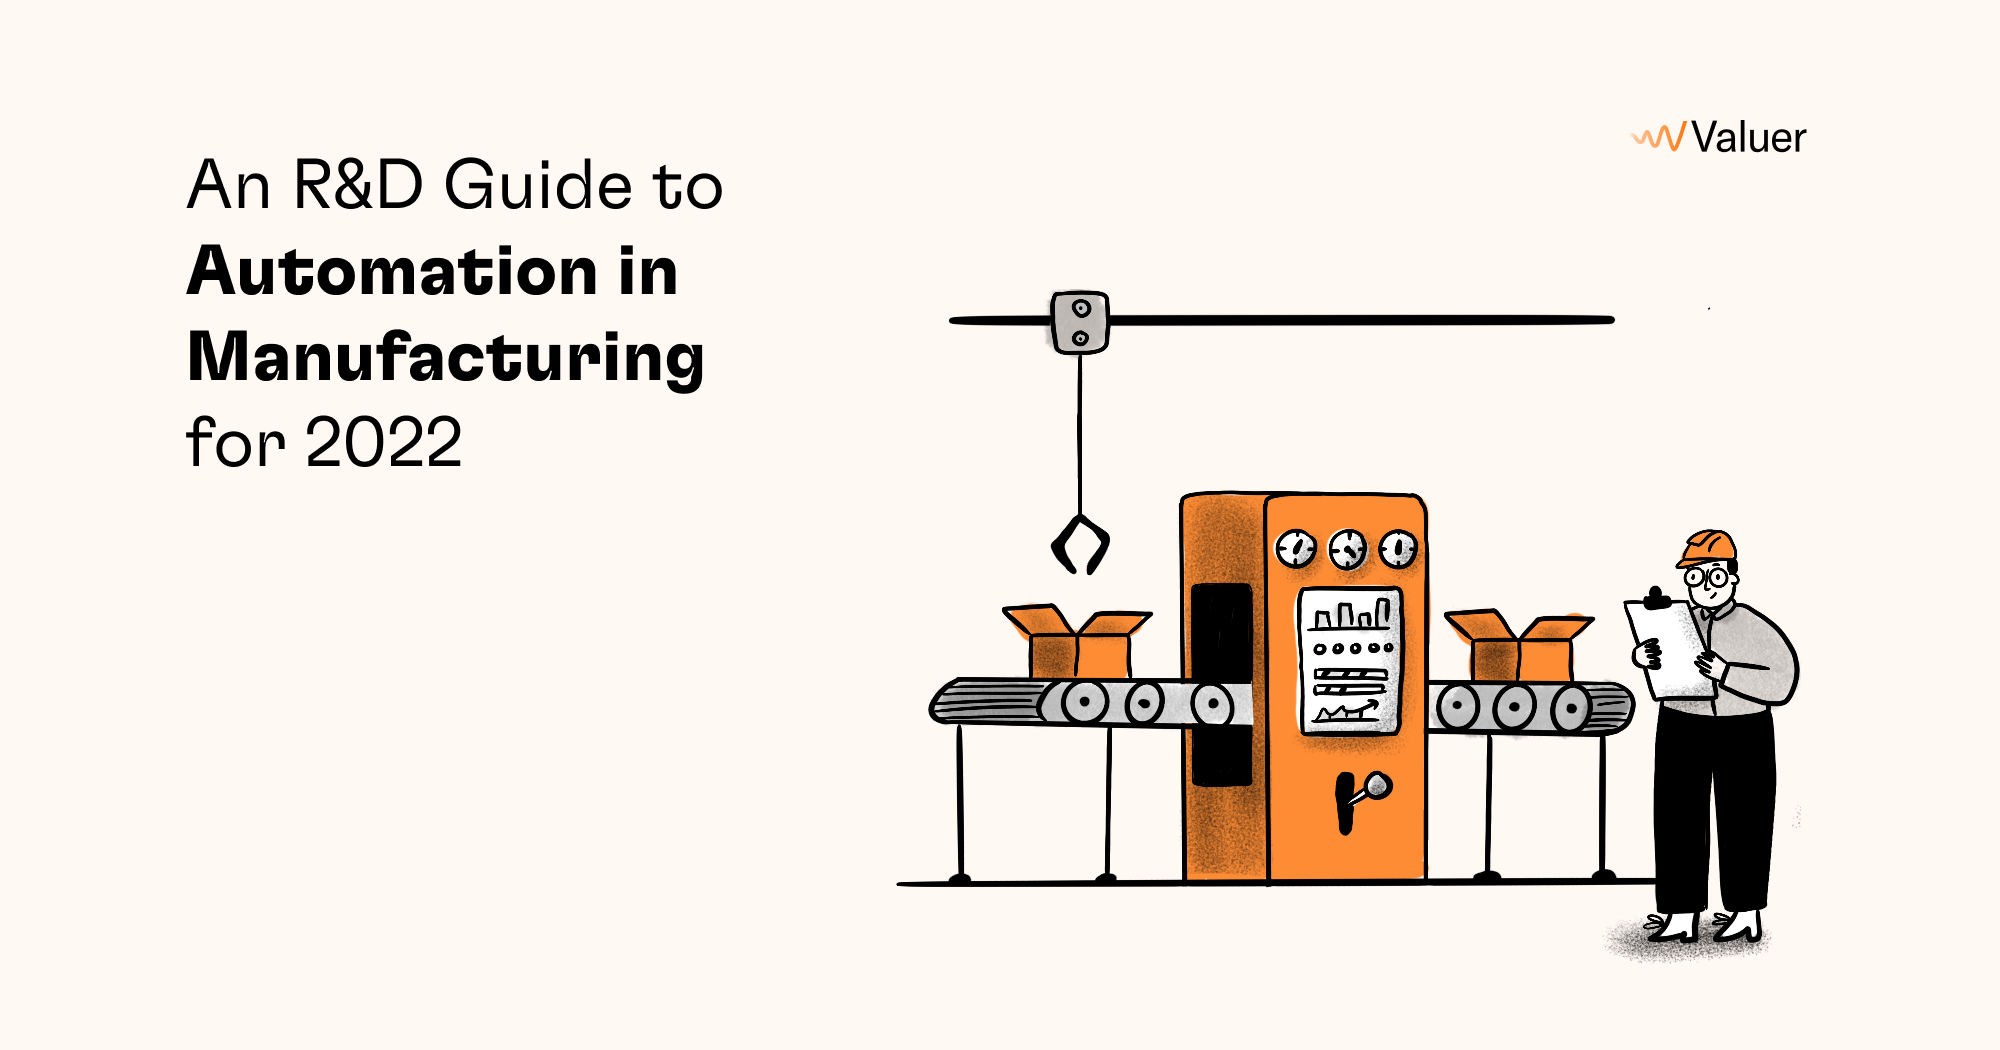 An R&D Guide to Automation in Manufacturing for 2022